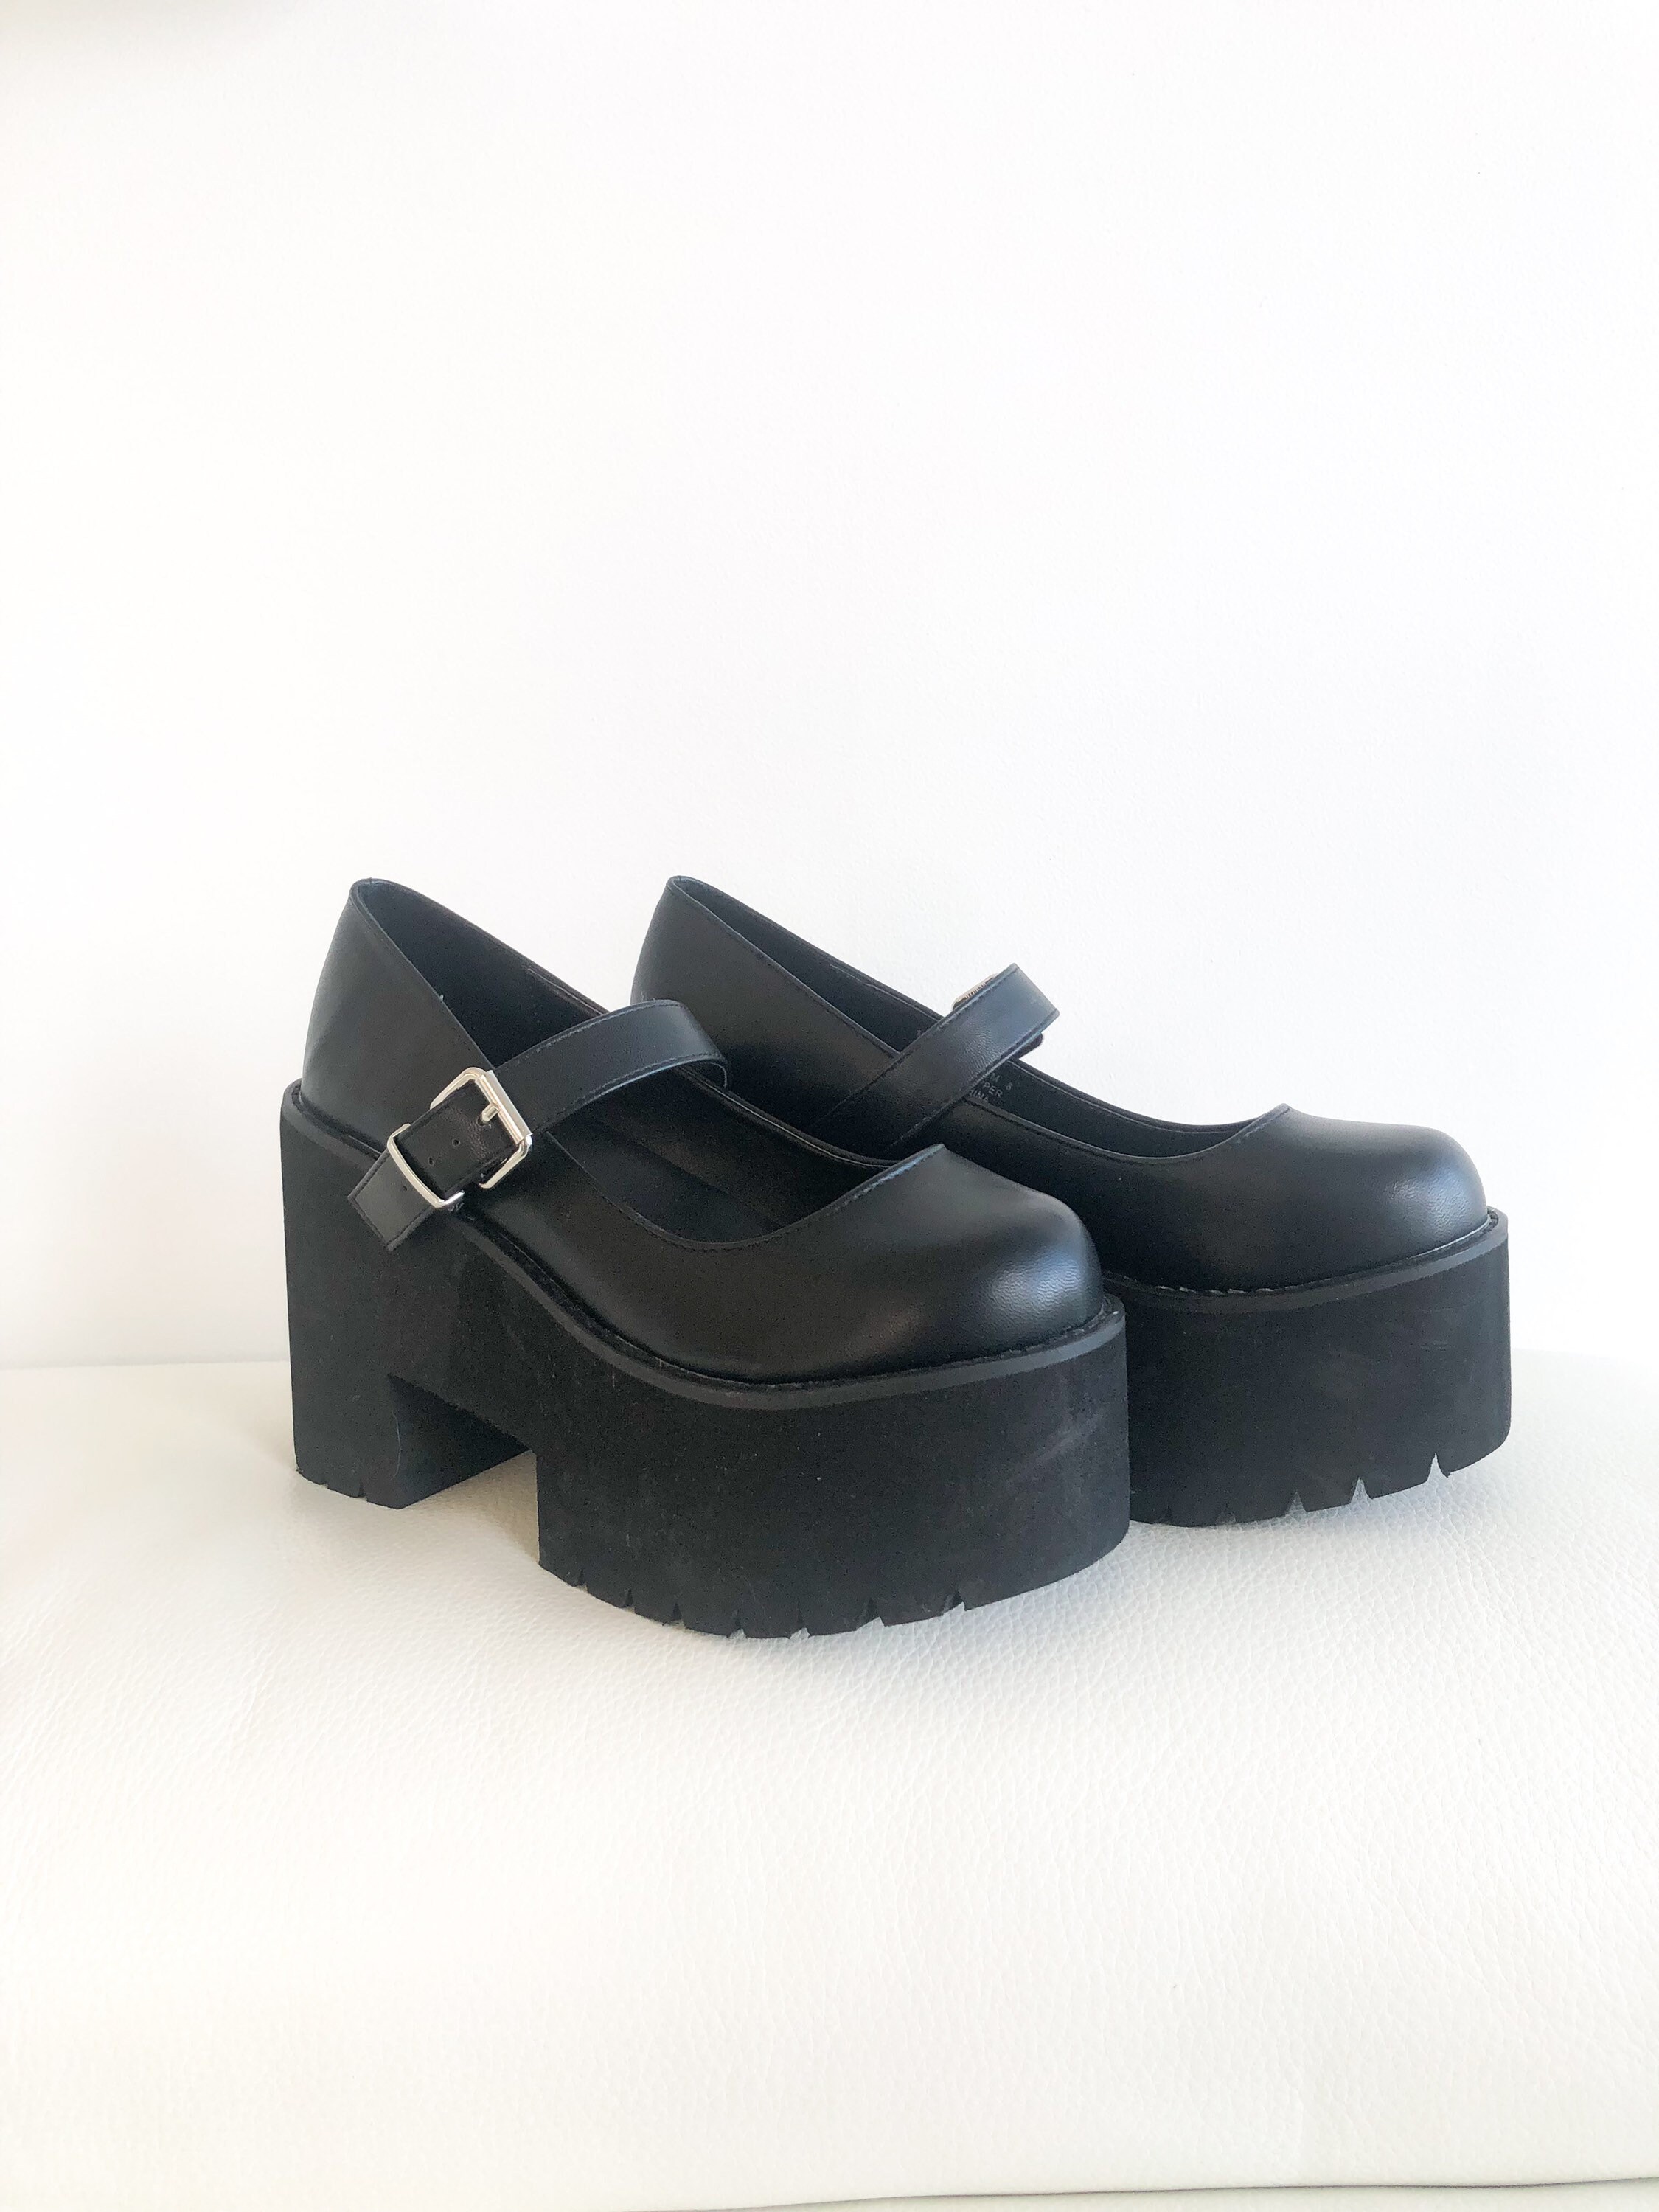 black Leather loafers Vintage Leather Loafers 90s shoes chunky mary janes 90s stompers 90s mary janes 90s platform mary janes